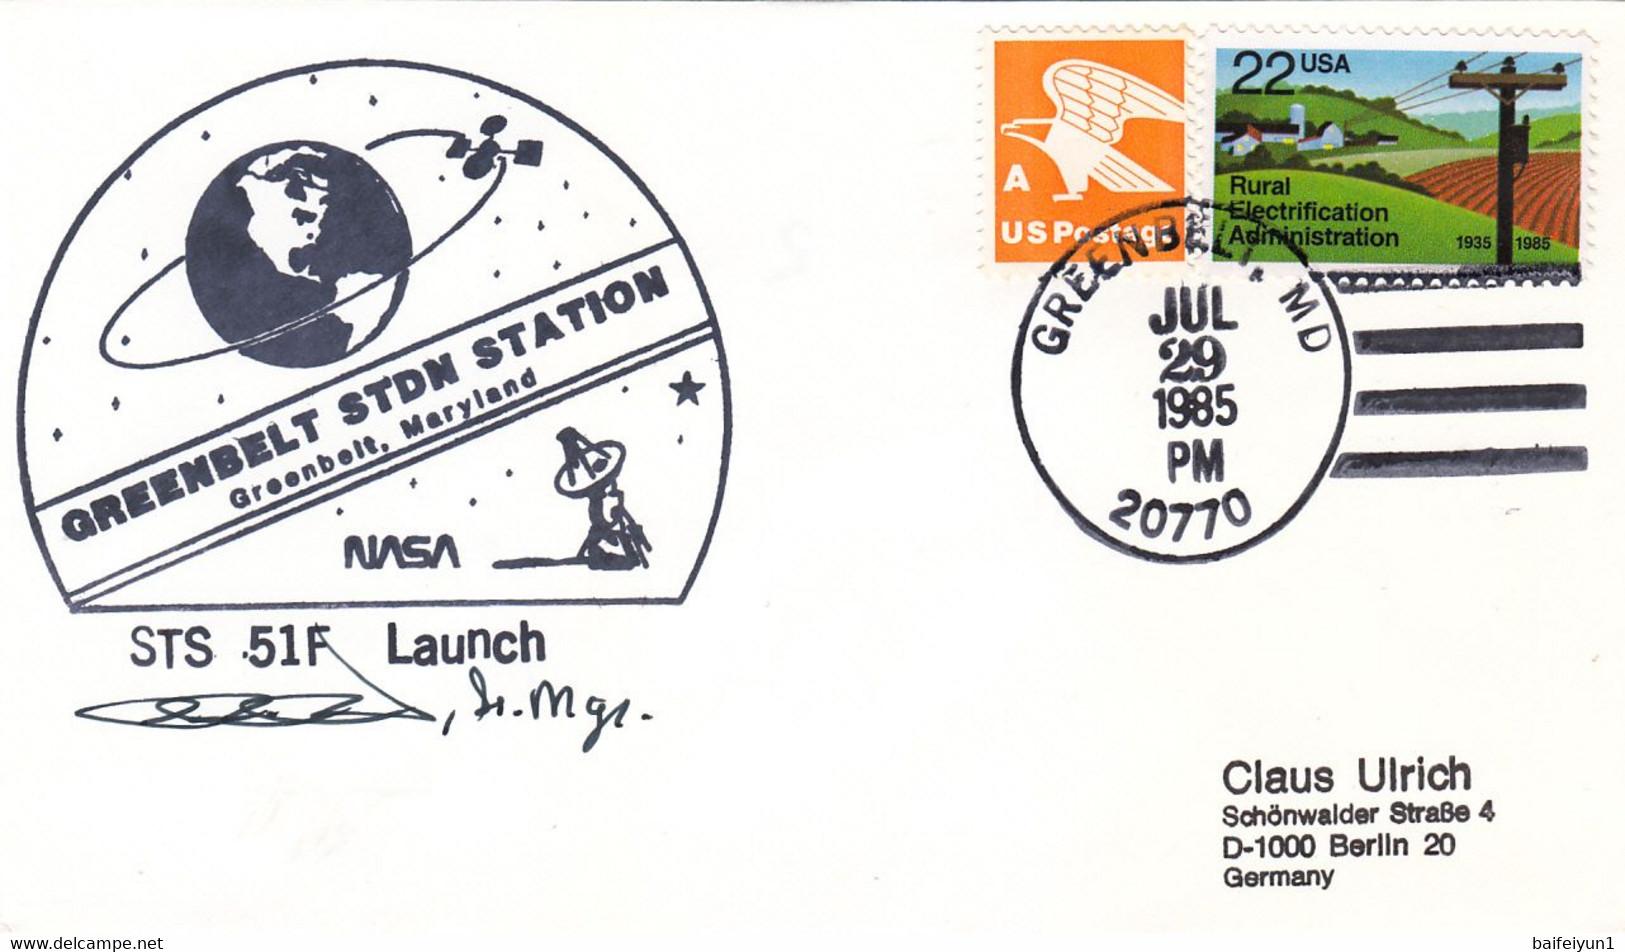 1985 USA  Space Shuttle Challenger STS-51F Mission And Greenbelt STDN STATION Commemorative Cover - América Del Norte